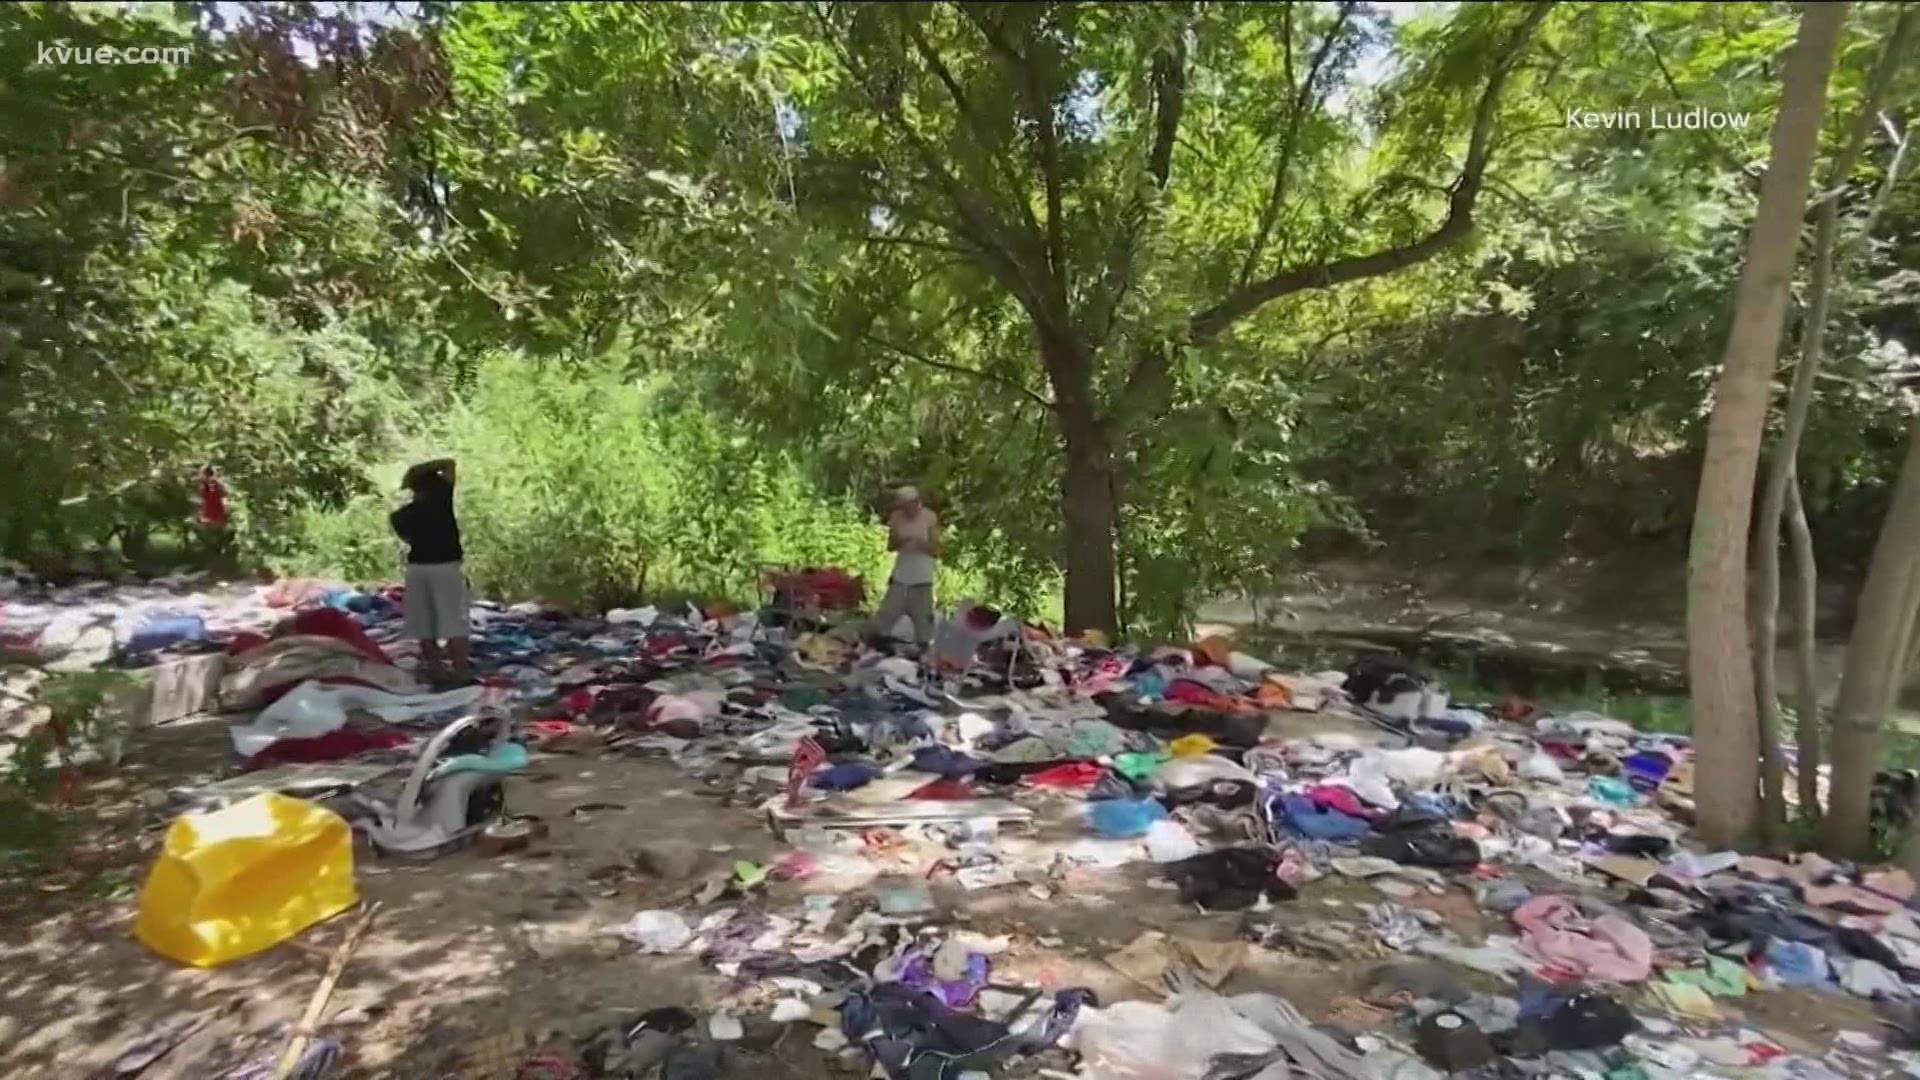 Trash, tents, clothes and more are filling a Central East Austin creek. Neighbors say the homeless camps are growing – and nothing is being done about it.